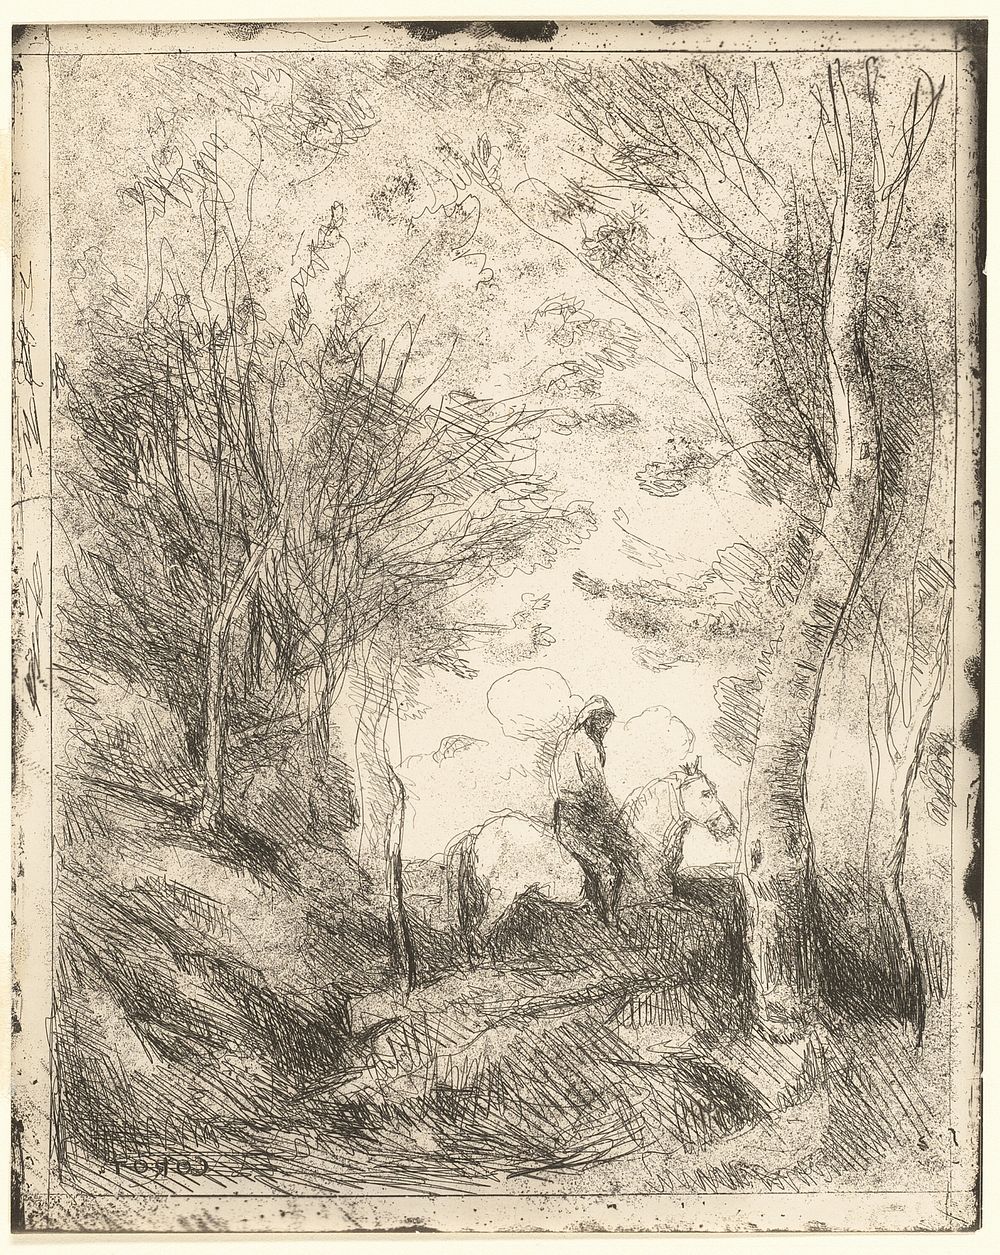 The Rider in the Woods, large plate by Jean Baptiste Camille Corot